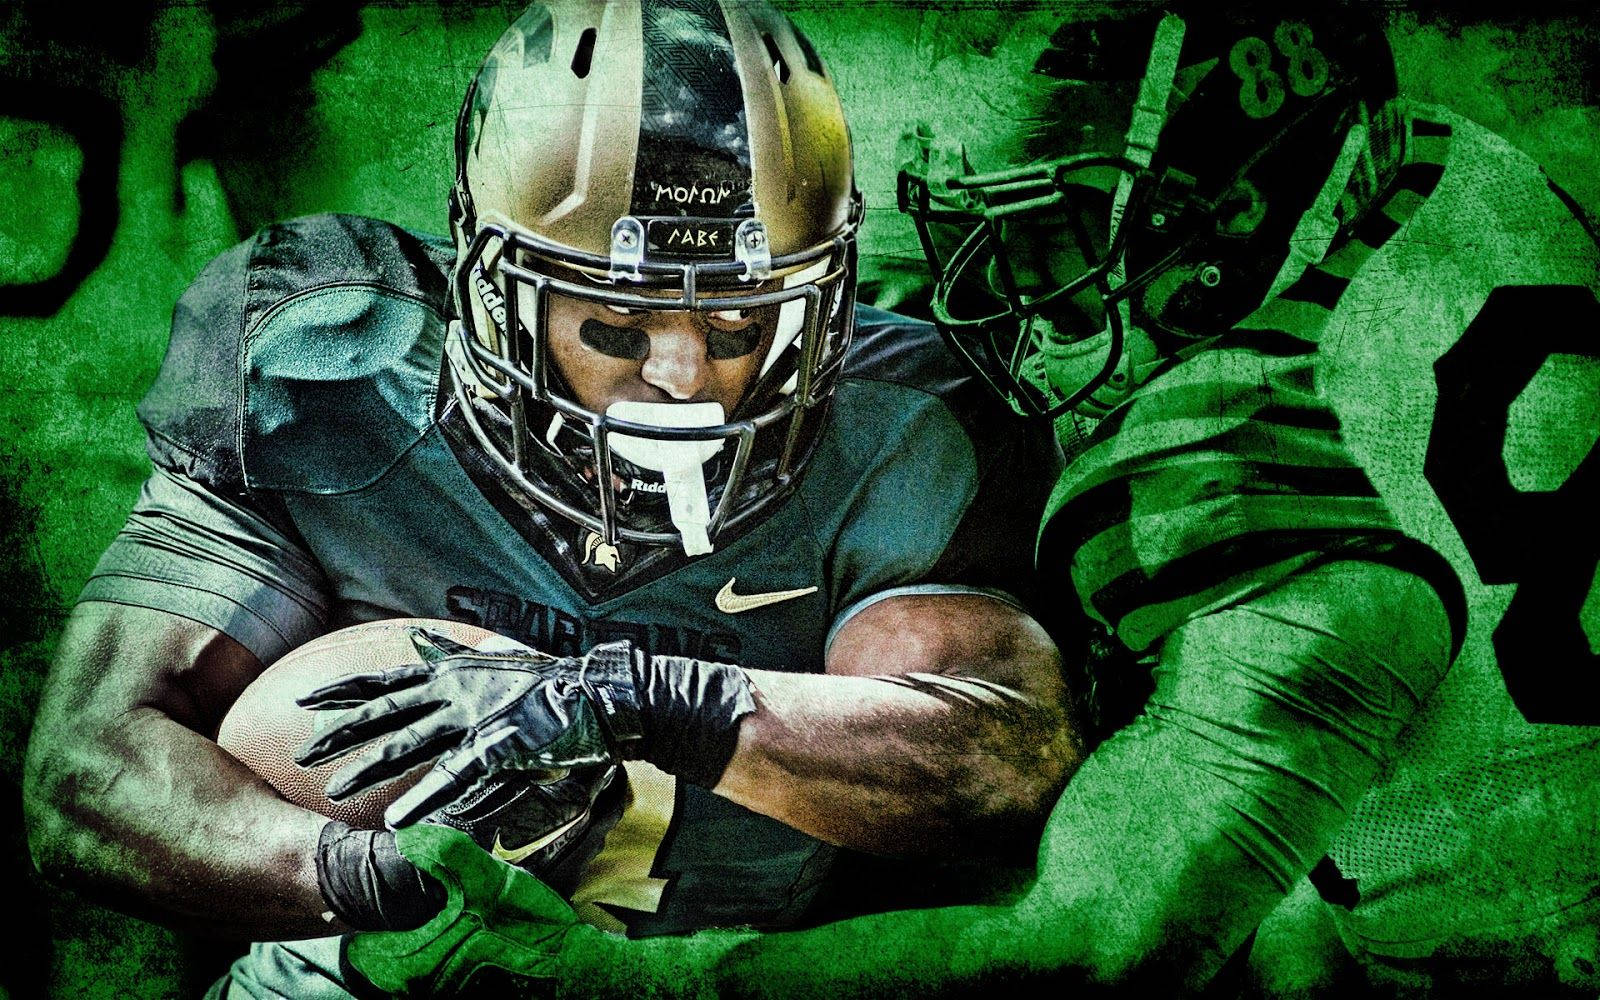 Michigan State University Football Player In Action Wallpaper